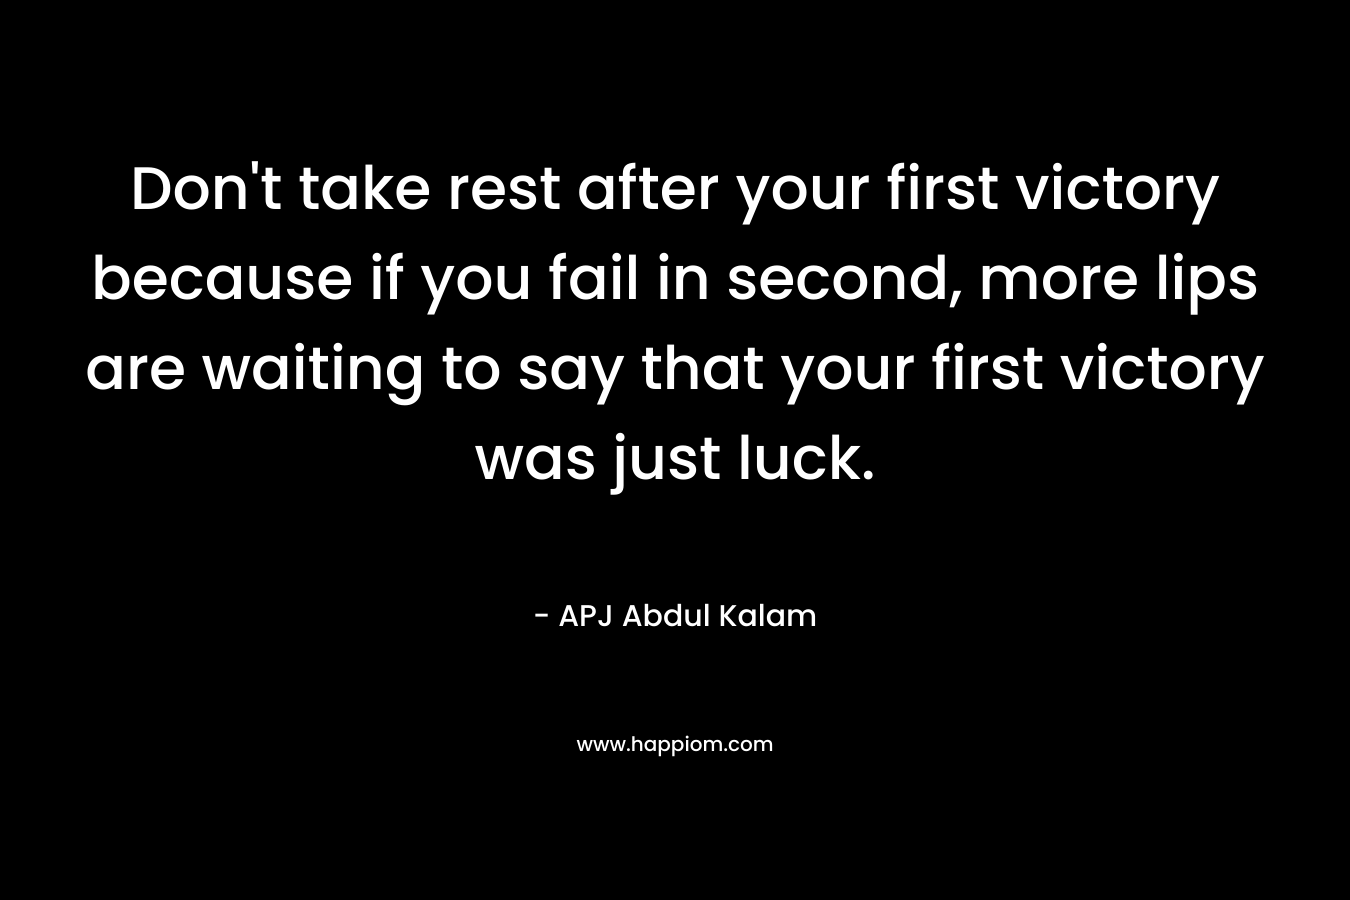 Don't take rest after your first victory because if you fail in second, more lips are waiting to say that your first victory was just luck.